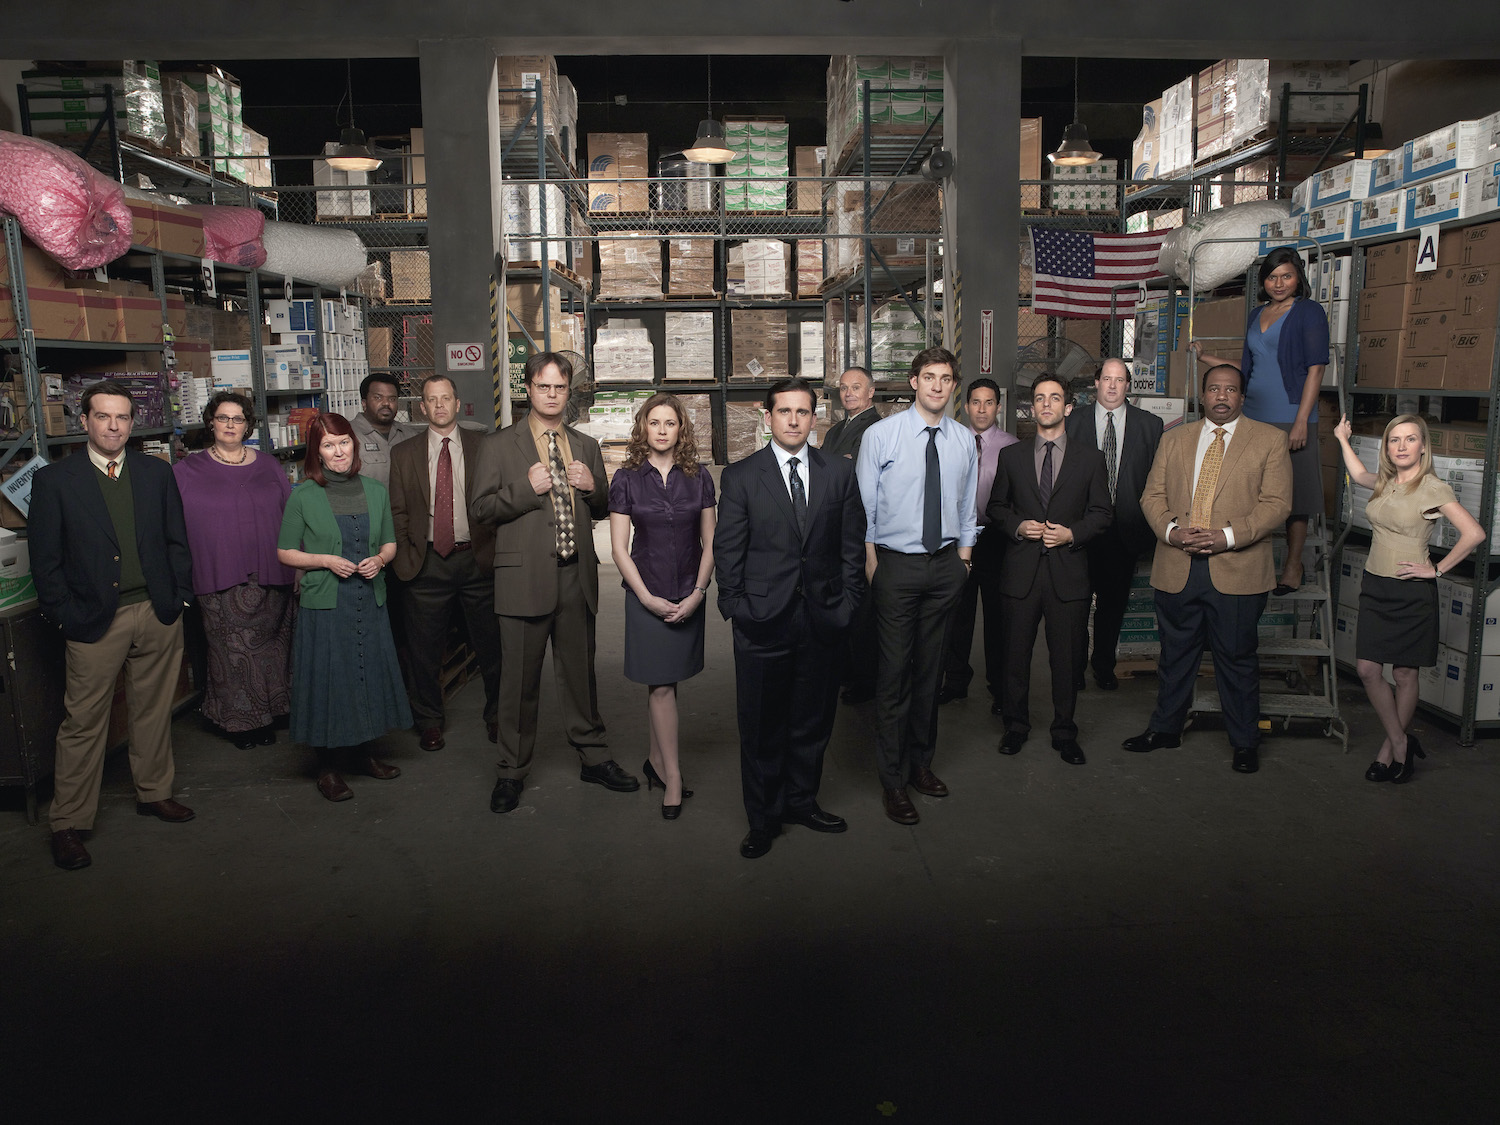 Cast of 'The Office' 